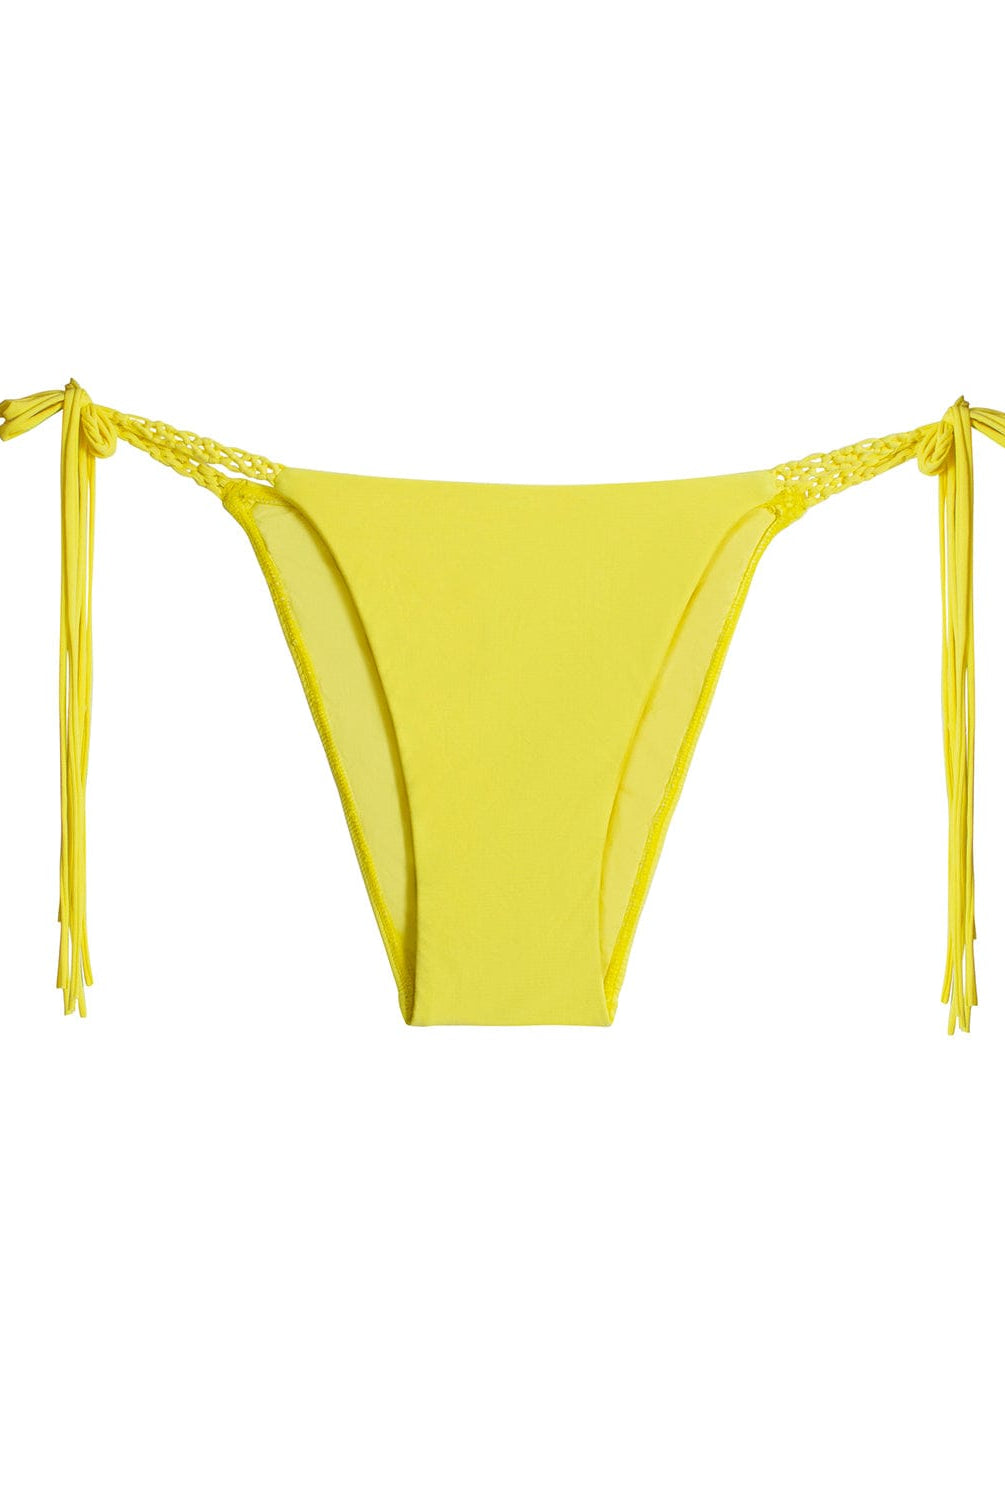 A yellow macrame tie side bikini bottom. Featured against a white wall background.